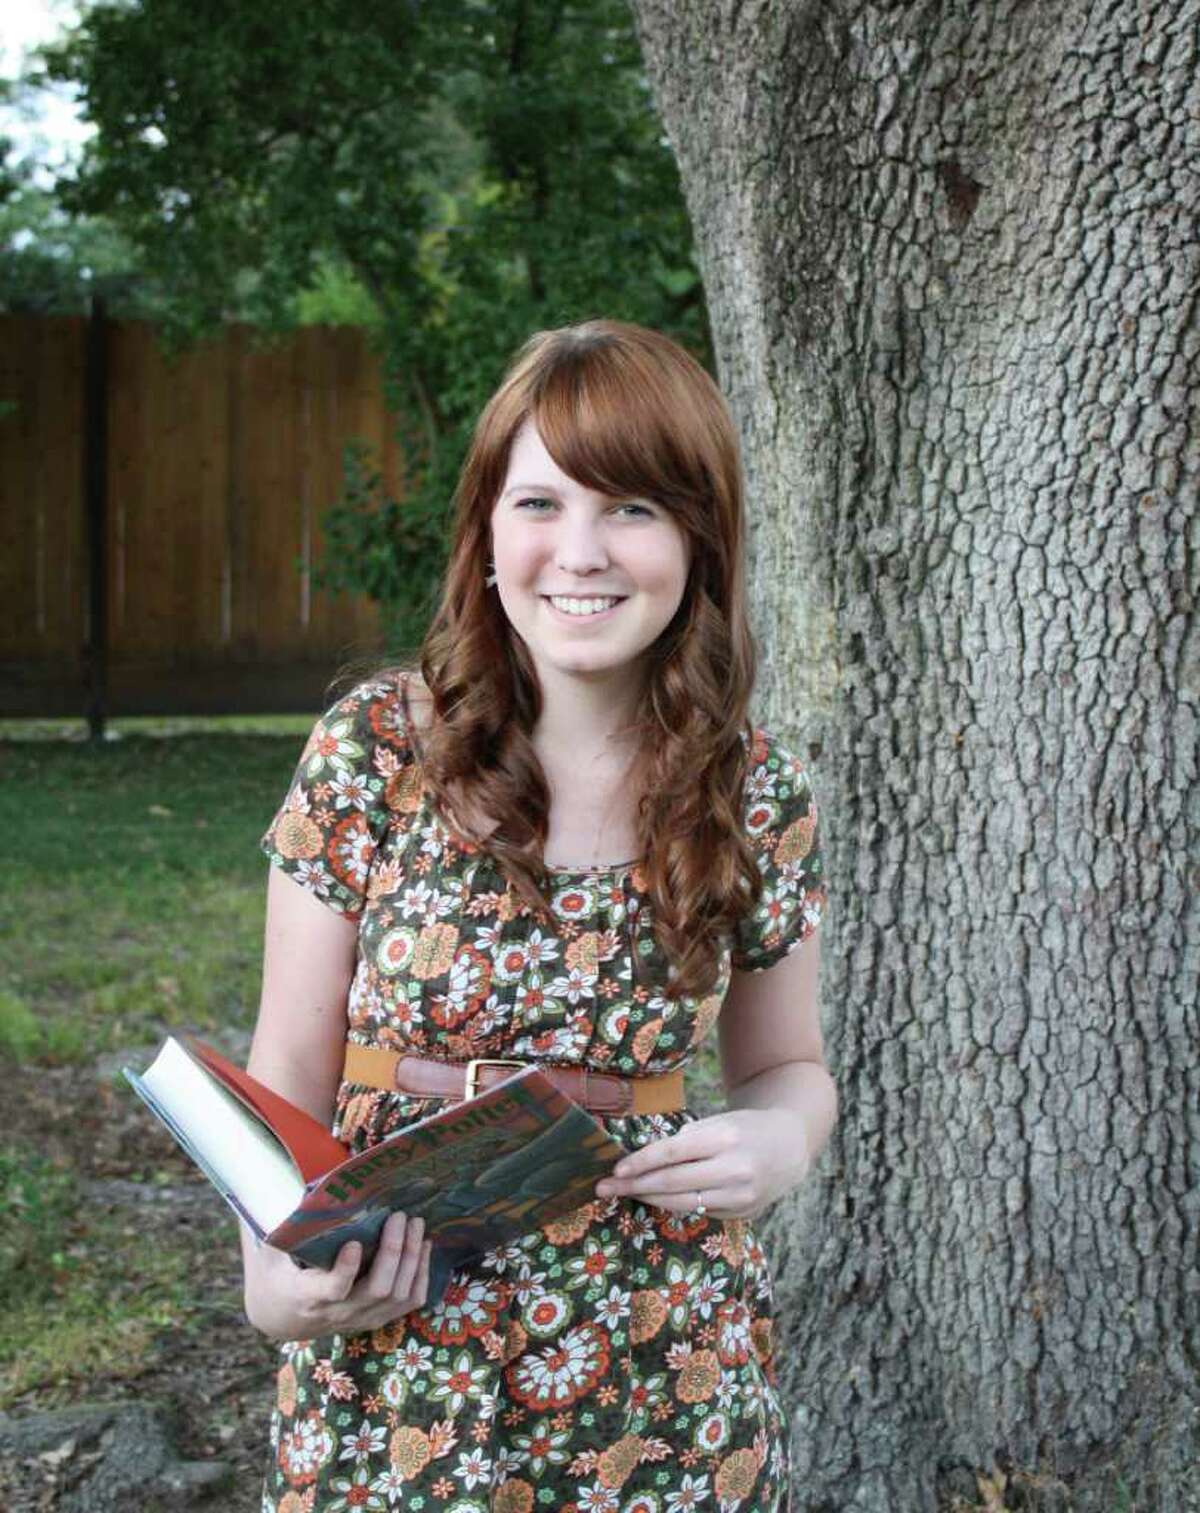 Photo provided by Kat Ryman Kat Ryman, of Beaumont recently dyed her hair 'Weasley Red.' The 22-year-old, who said she grew up with Harry Potter, is preparing for the release of 'Harry Potter and the Deathly Hallows, Part 1.'